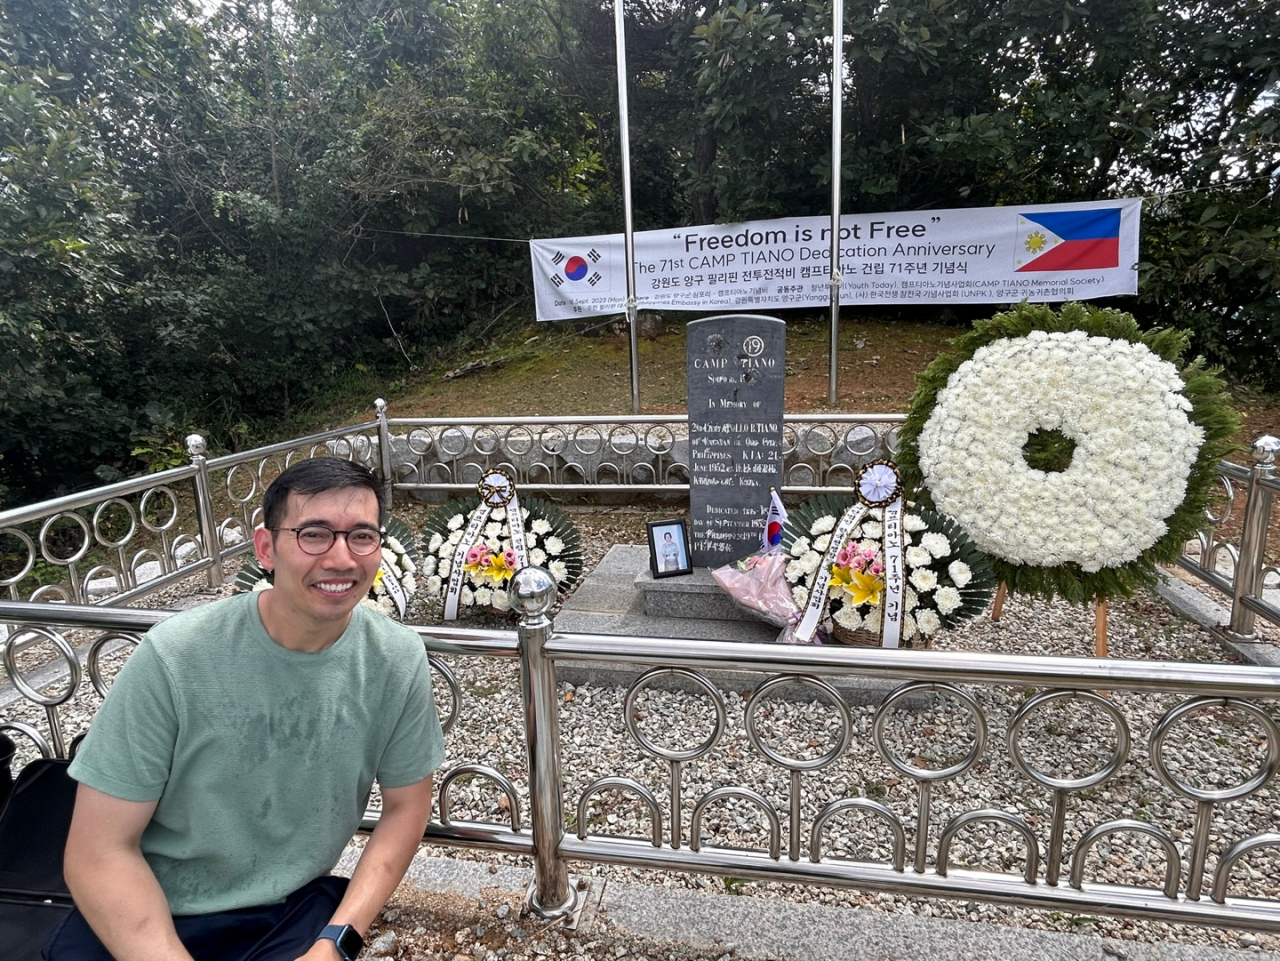 Merz Panares Lim, a bereaved family member of Lt. Apollo Tiano, poses for a photo next to the Camp Tiano War Memorial during a commemoration ceremony in Yanggu-gun, Gangwon Province, Monday. (Courtesy of Jenny Yoon)